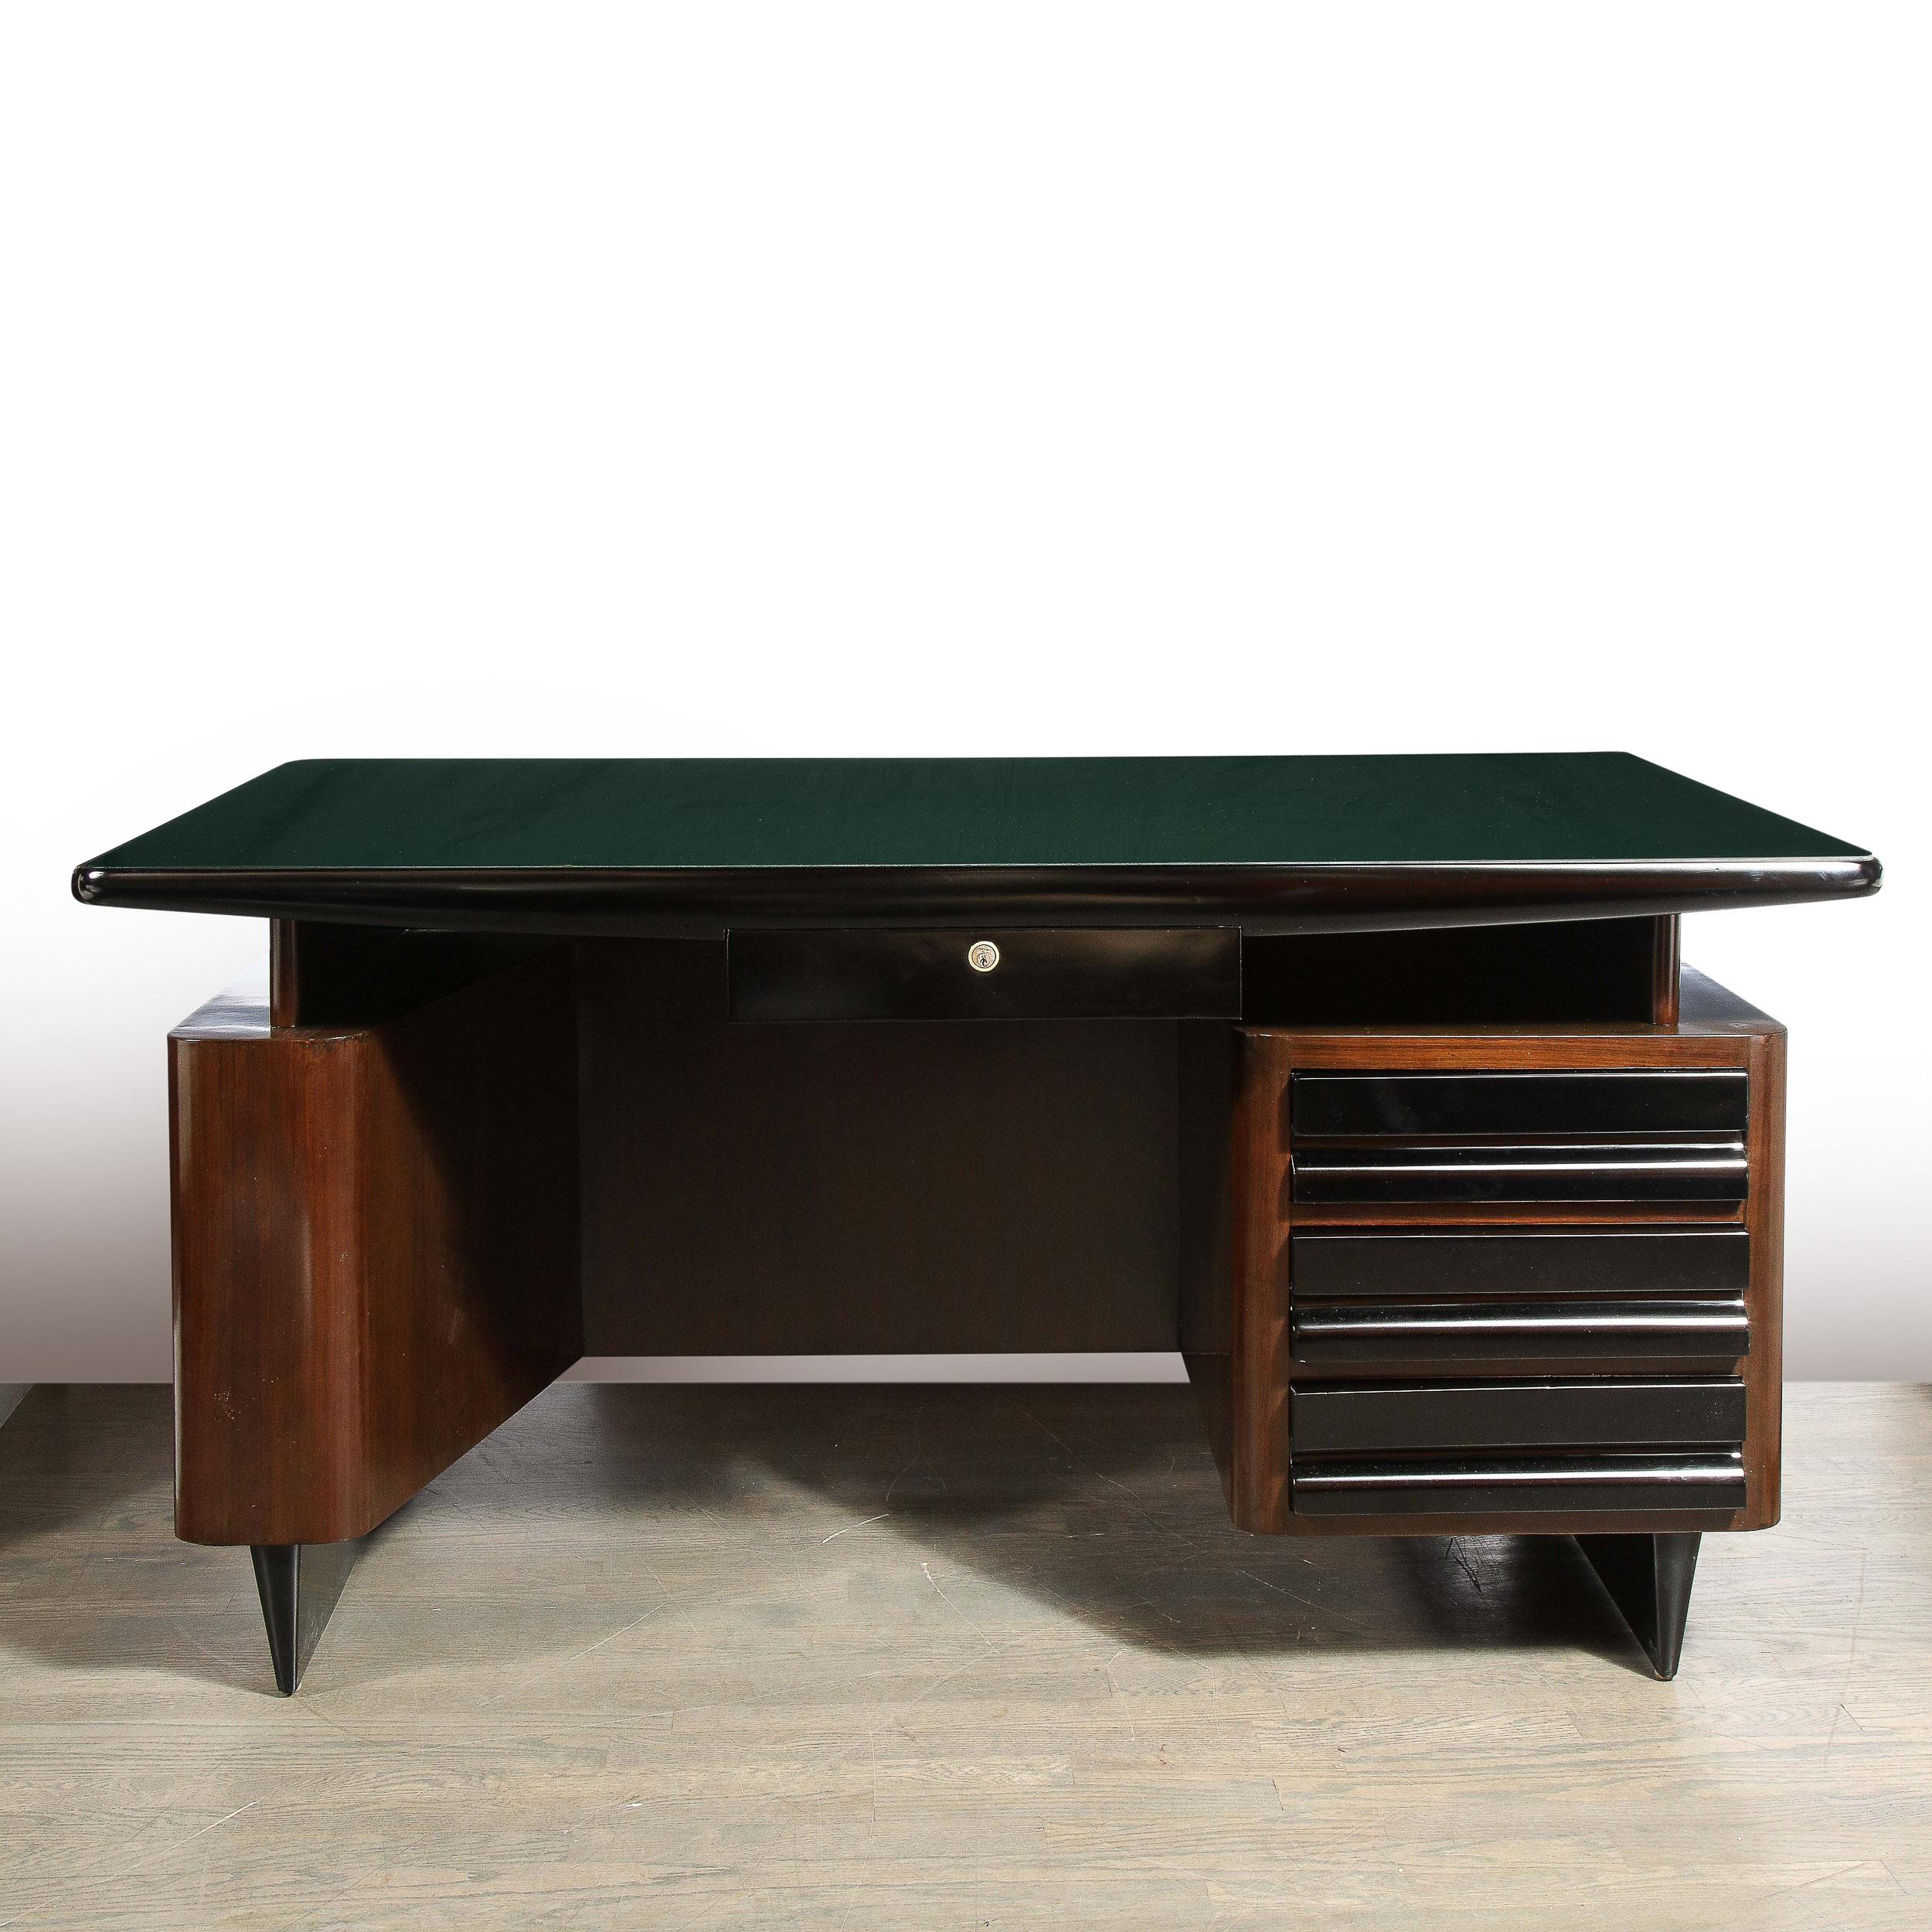 This sophisticated Mid-Century Modern desk was realized in Italy in 1948. It features tapered volumetric triangular atomic form black lacquer legs at the base that support a stylized rectilinear body in sumptuous bookmatched walnut with a vertical